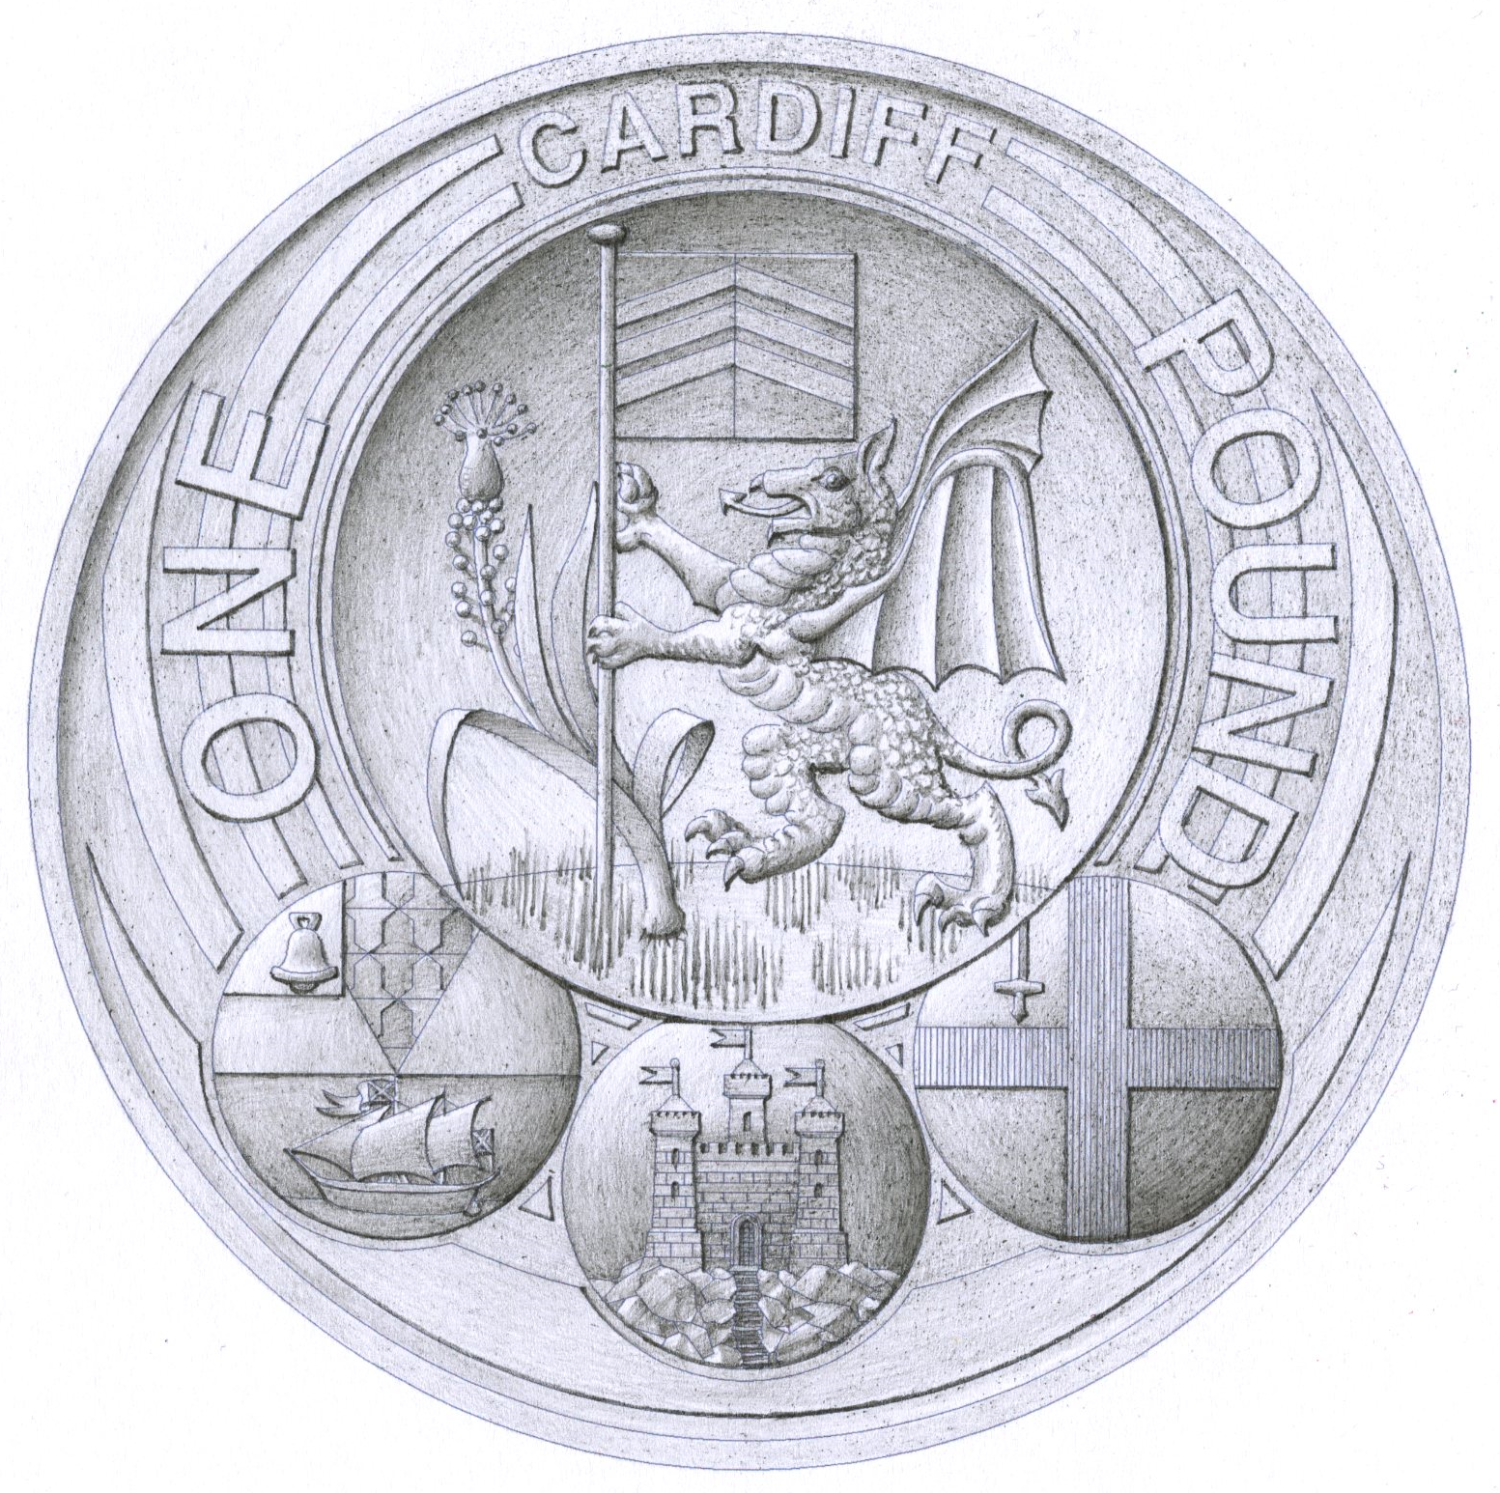 Artwork for the 2011 Capital Cities £1 coin